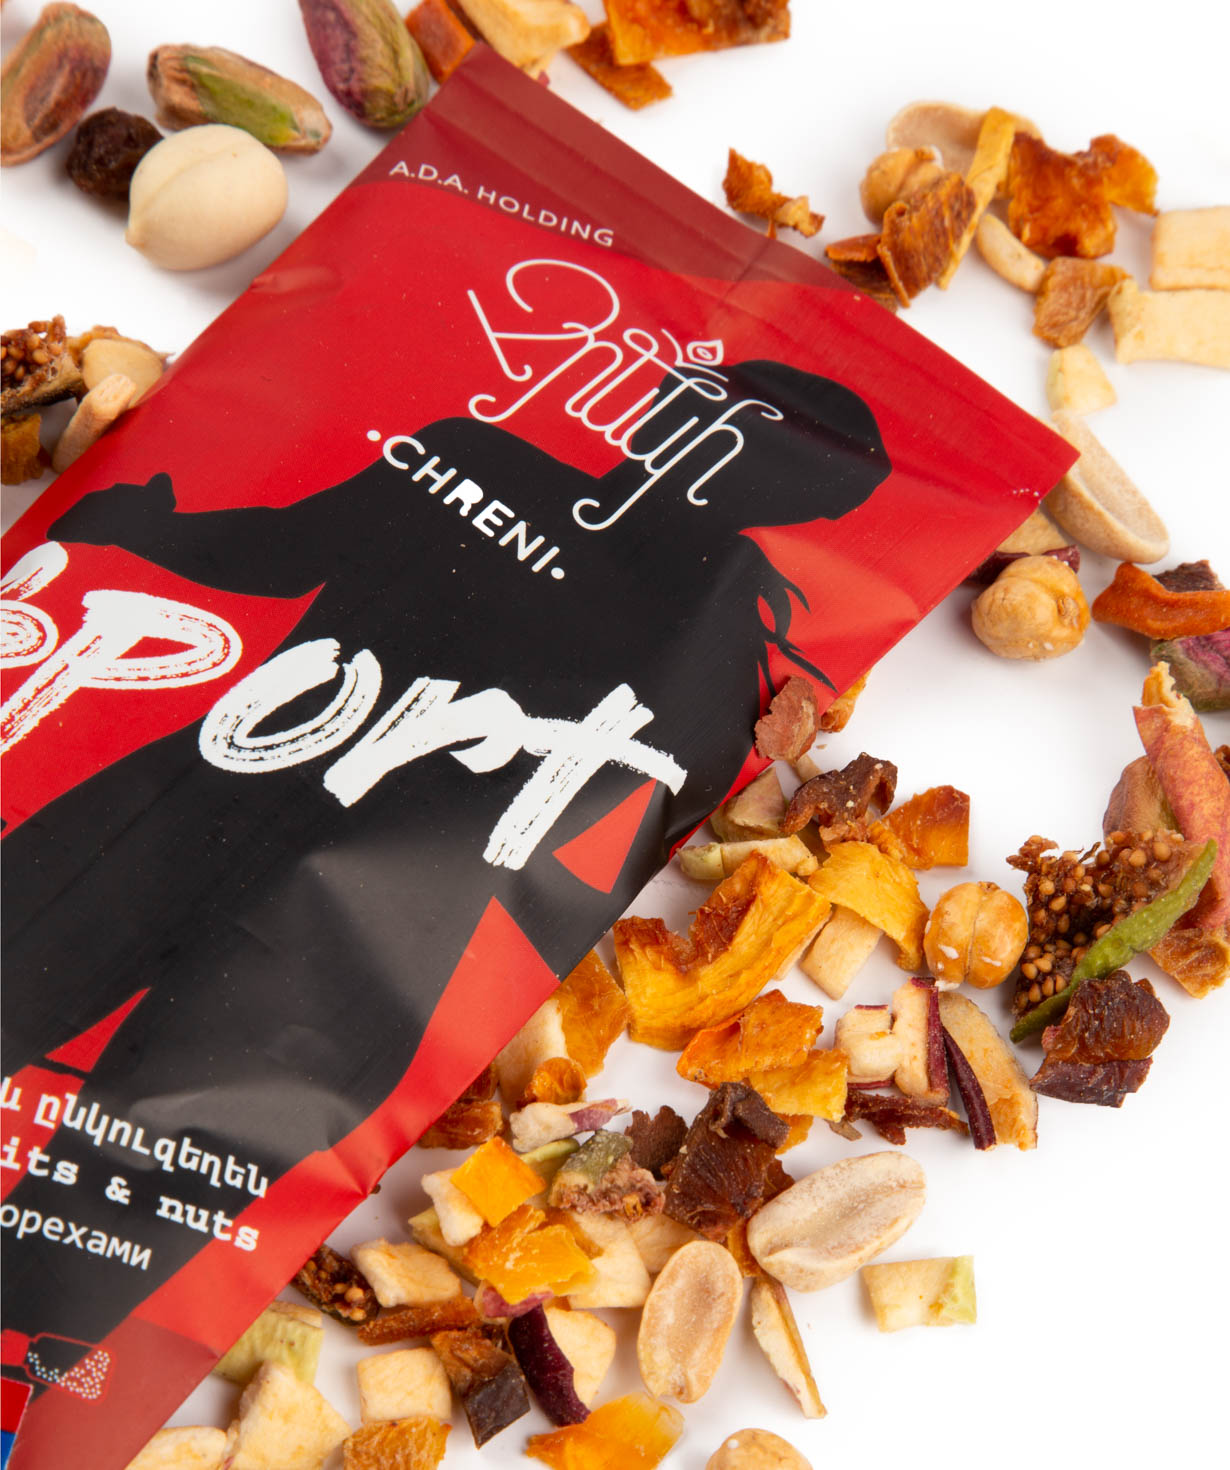 Dried fruits `Chreni Sport` with salted walnuts